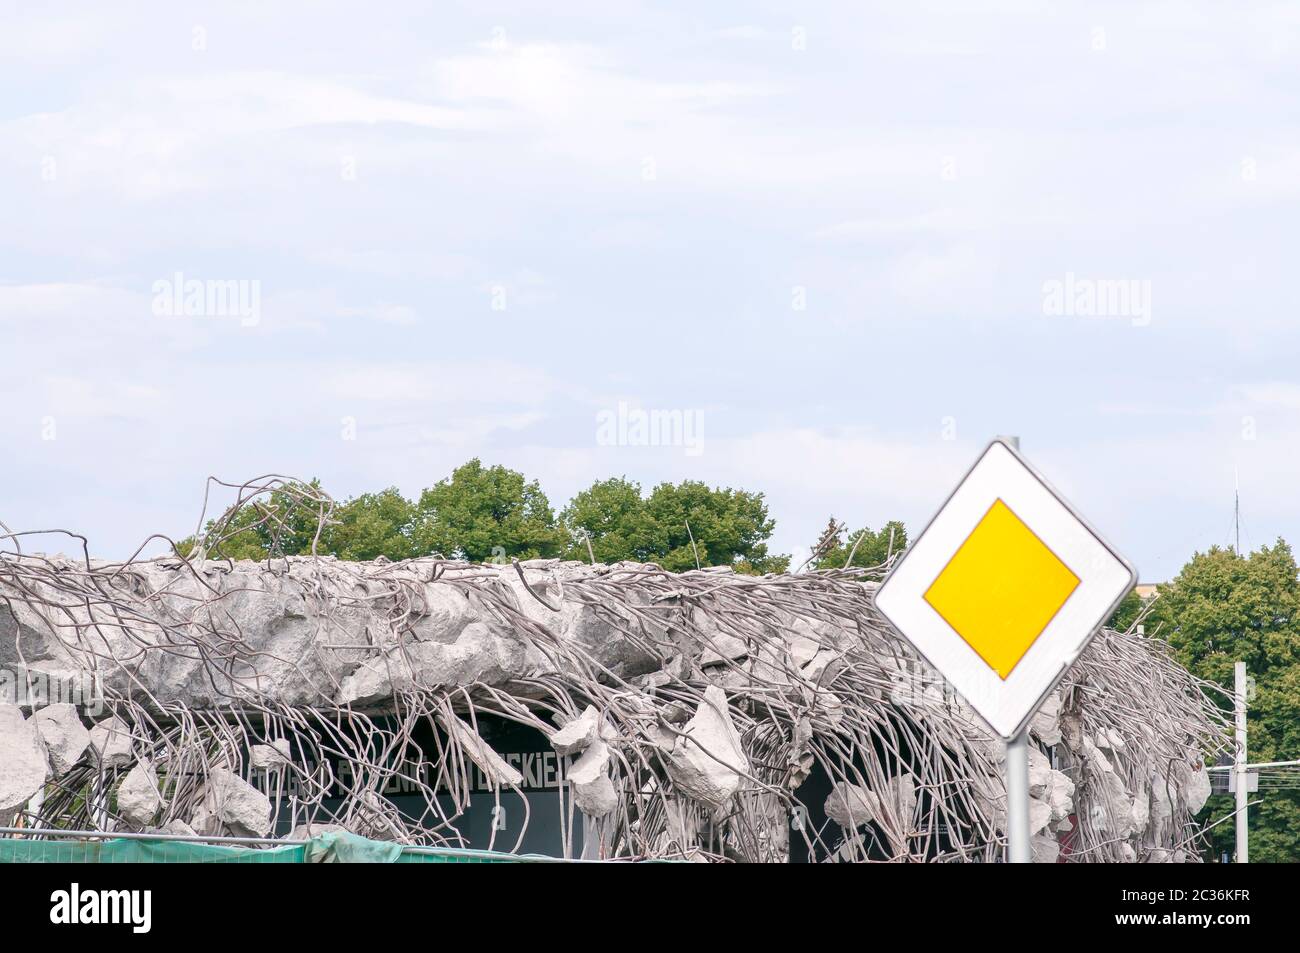 Wroclaw, Poland, August 2019. Demolition of an old overpass in Wroclaw. Stock Photo